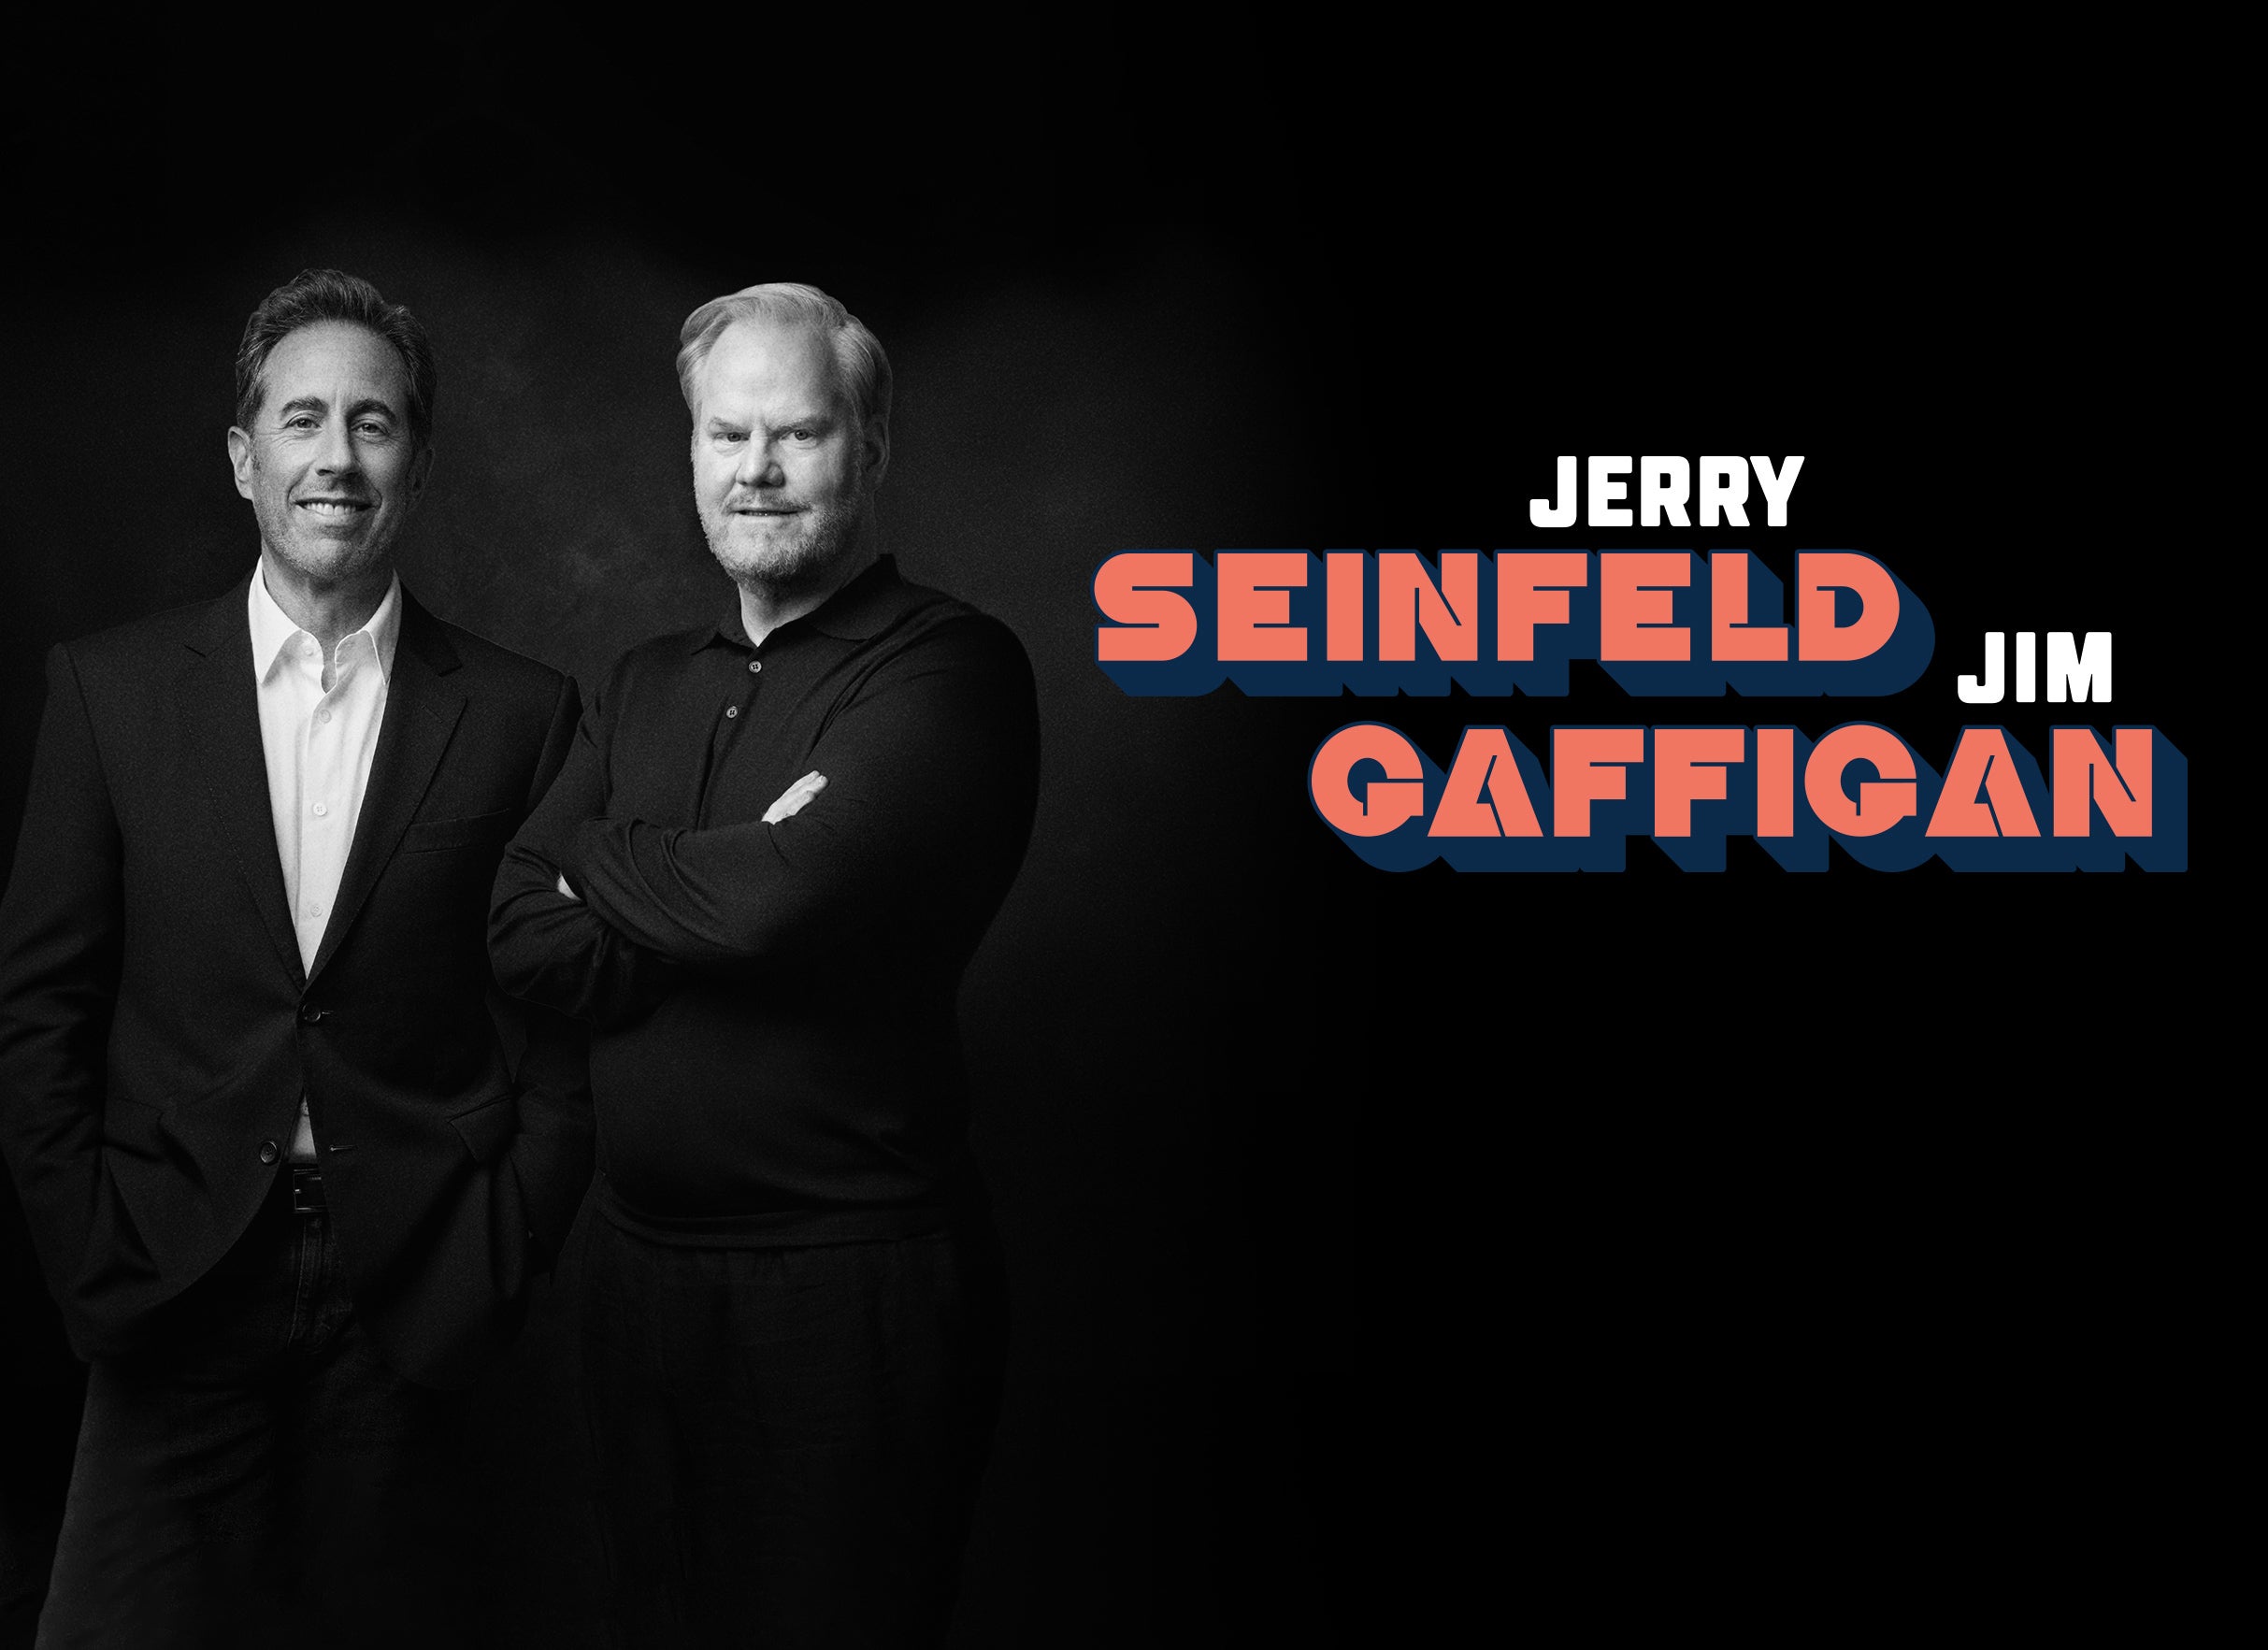 exclusive presale password for Jerry Seinfeld And Jim Gaffigan affordable tickets in Chicago at United Center